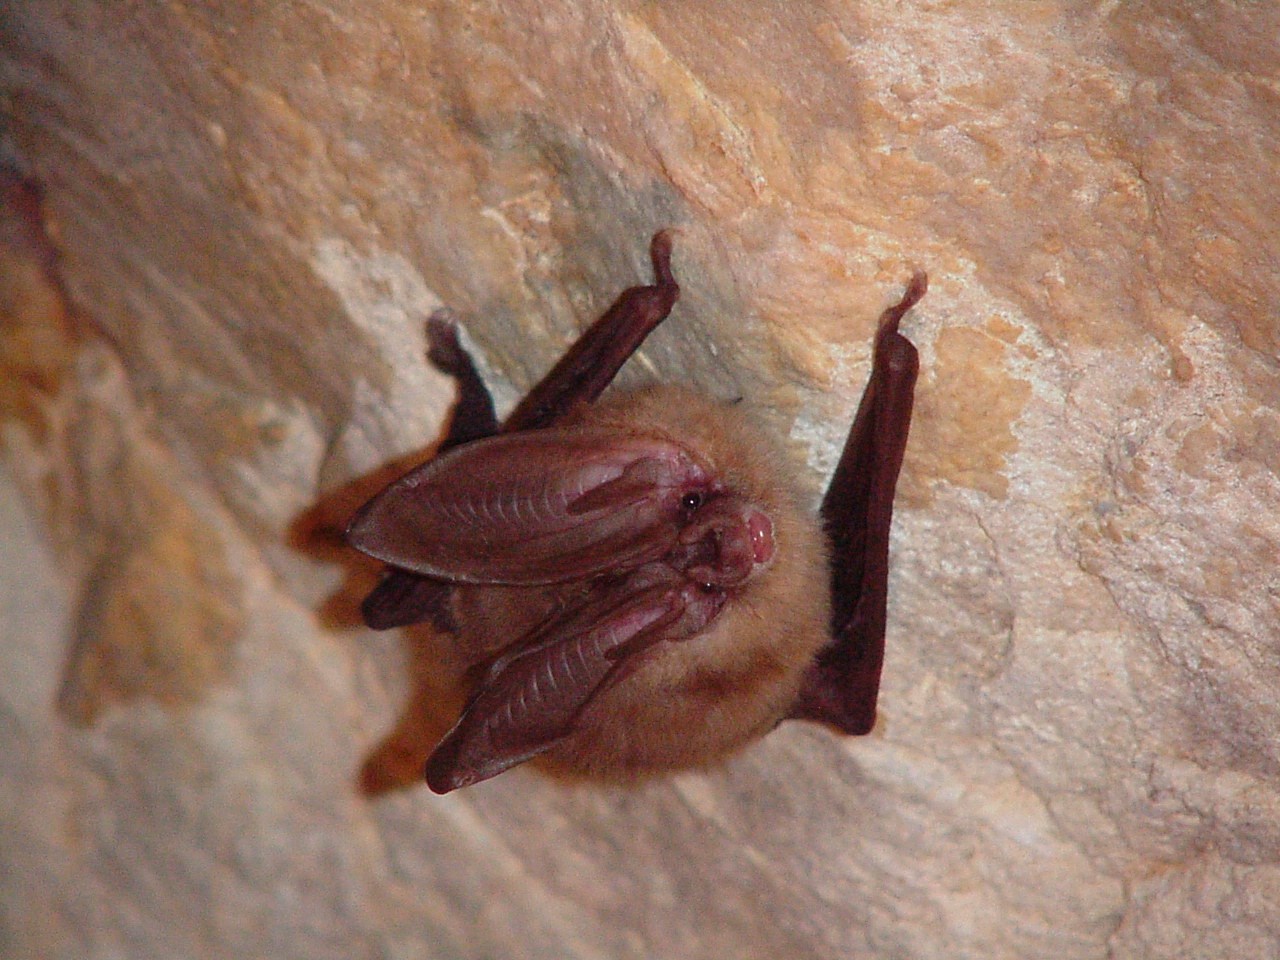 Townsend's big-eared bat hanging on a wall in a cave